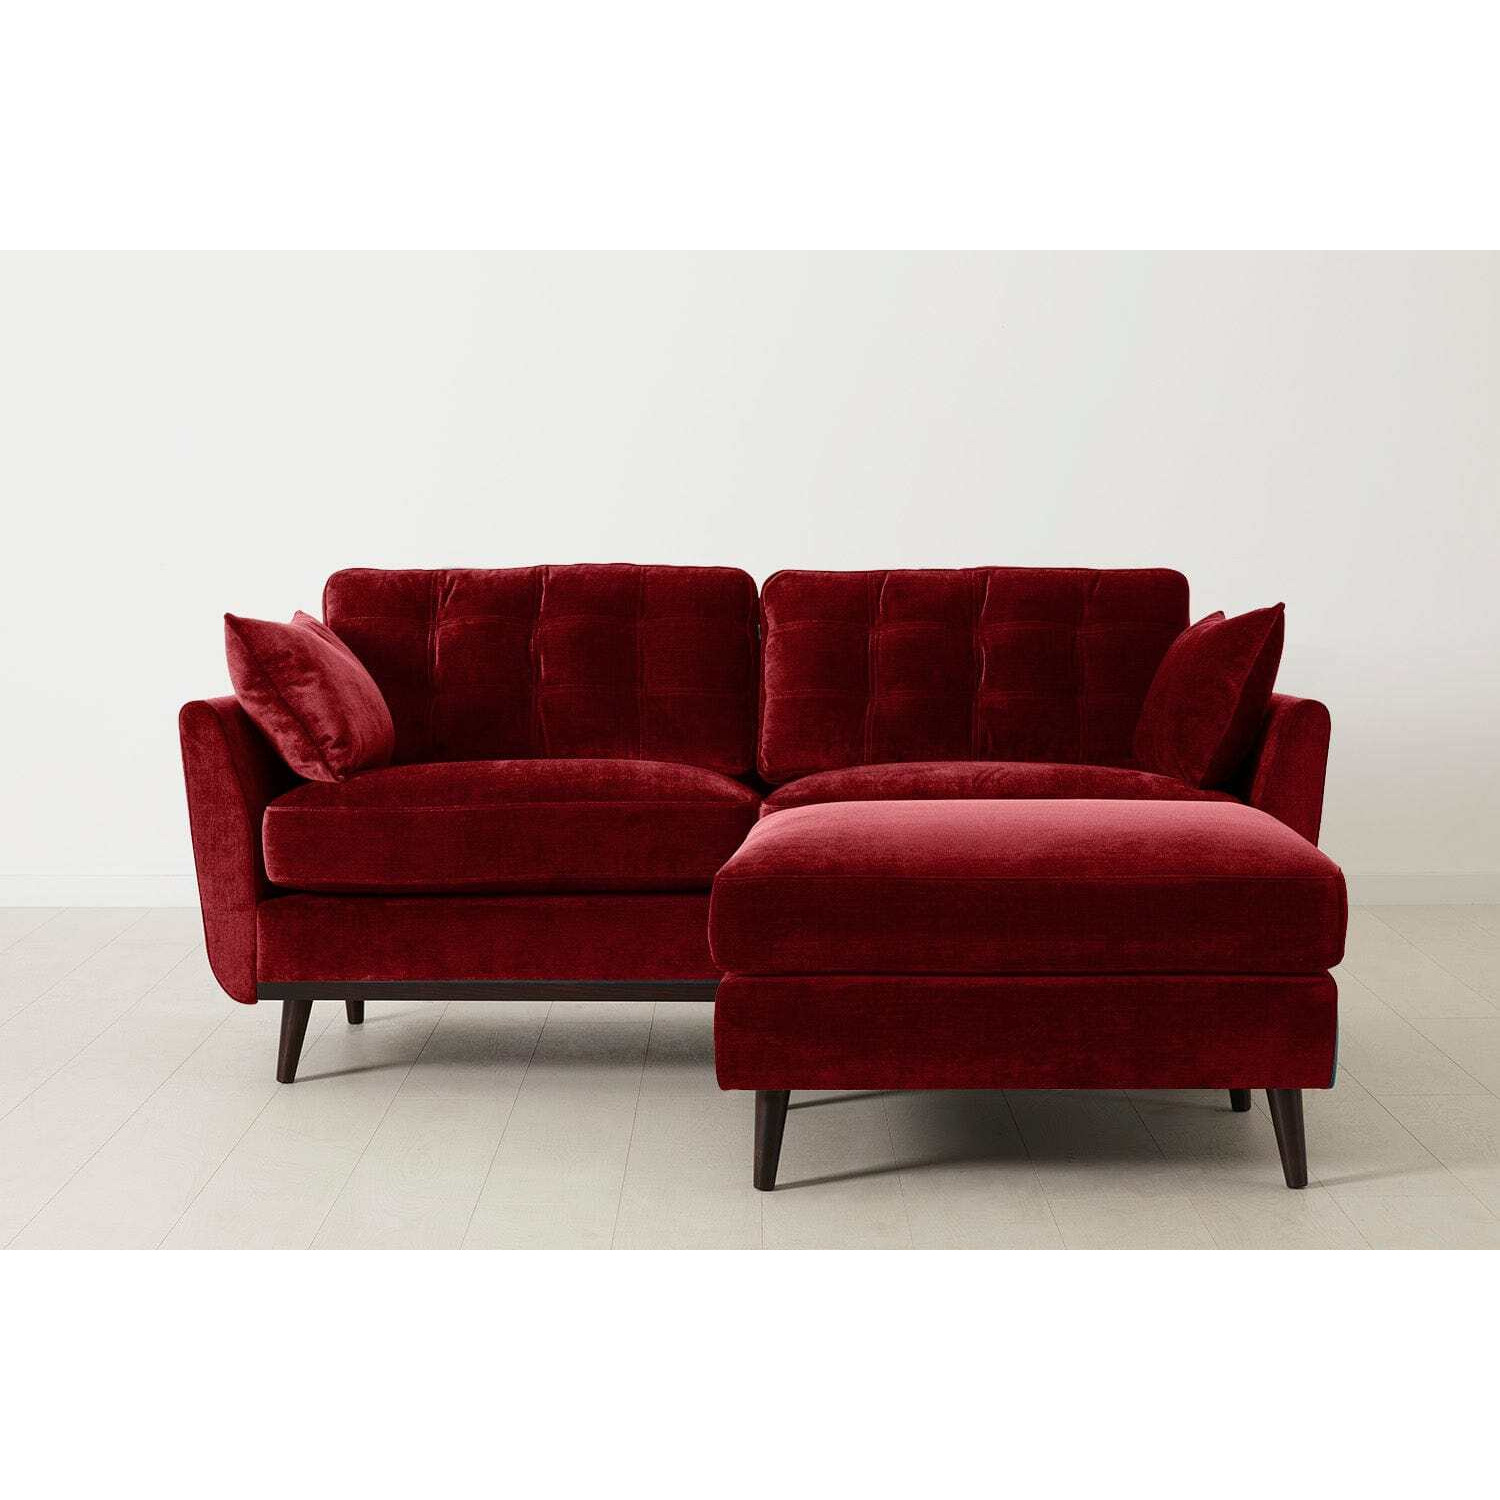 Model 10 2 Seater Right Corner Sofa From Swyft - Burgundy - Quick Delivery